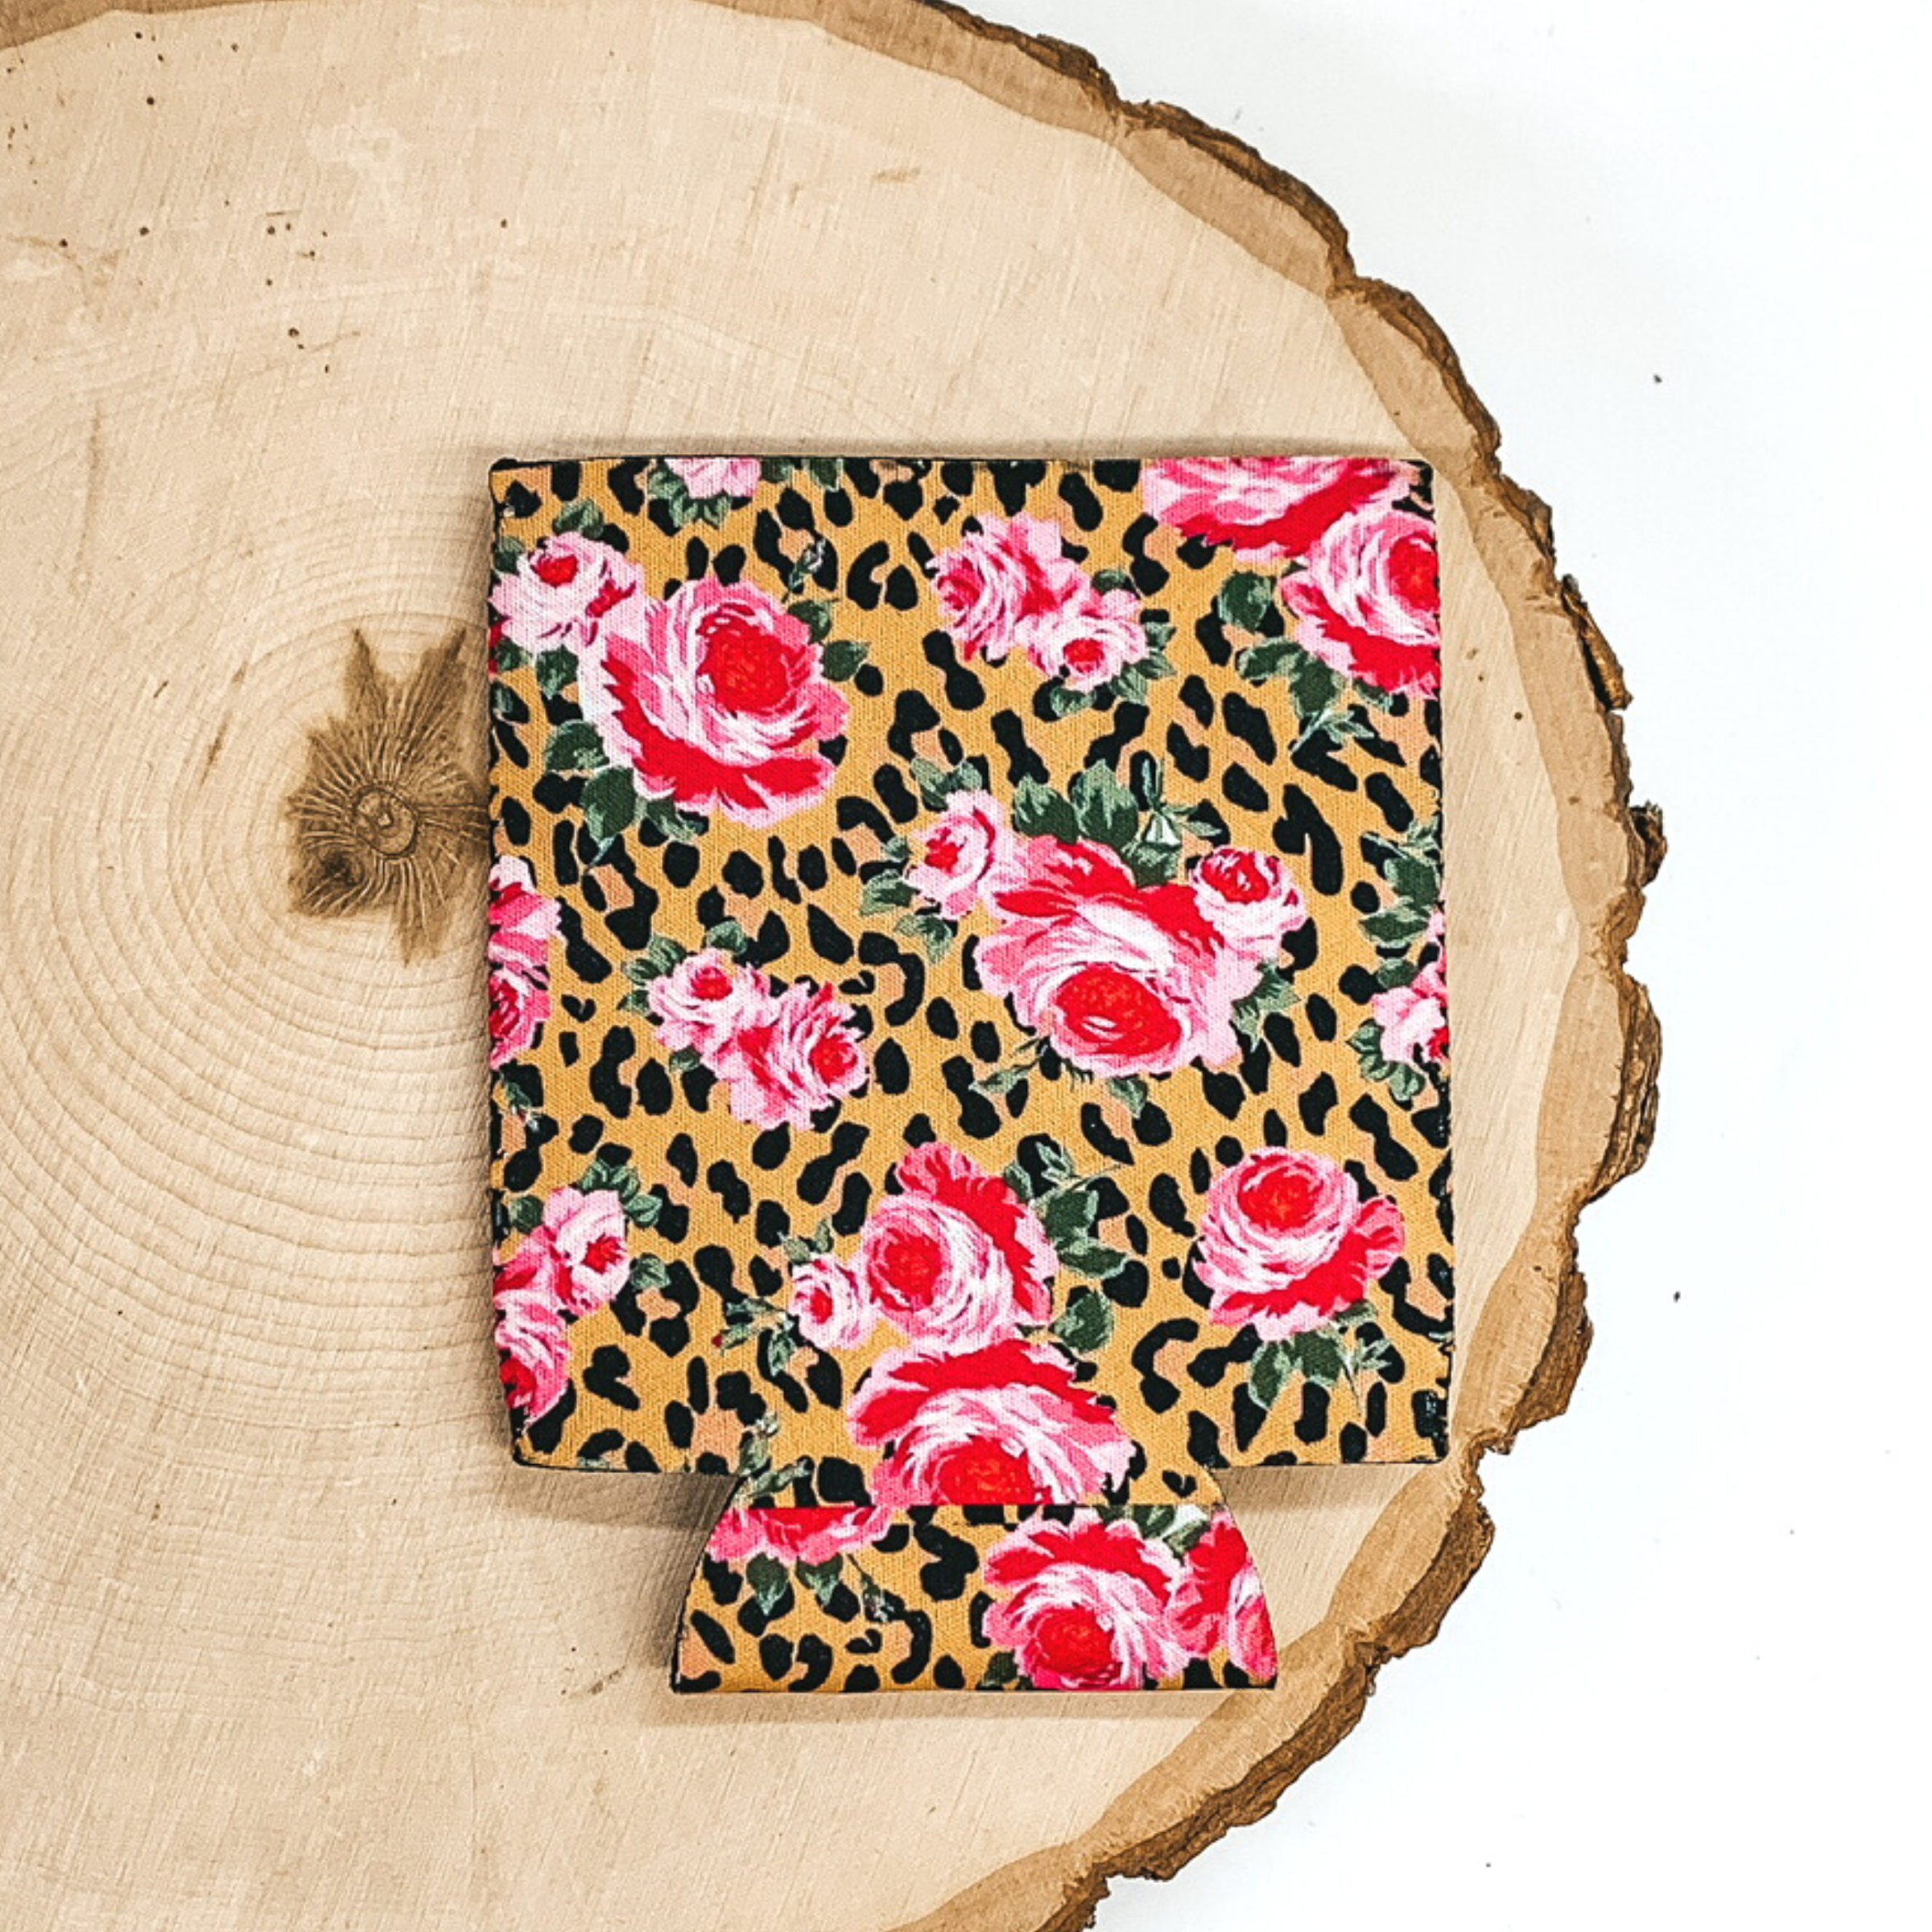 Tan can koozie with black leopard print spots and pink/red roses. This koozie is pictured on a piece of wood on a white background.